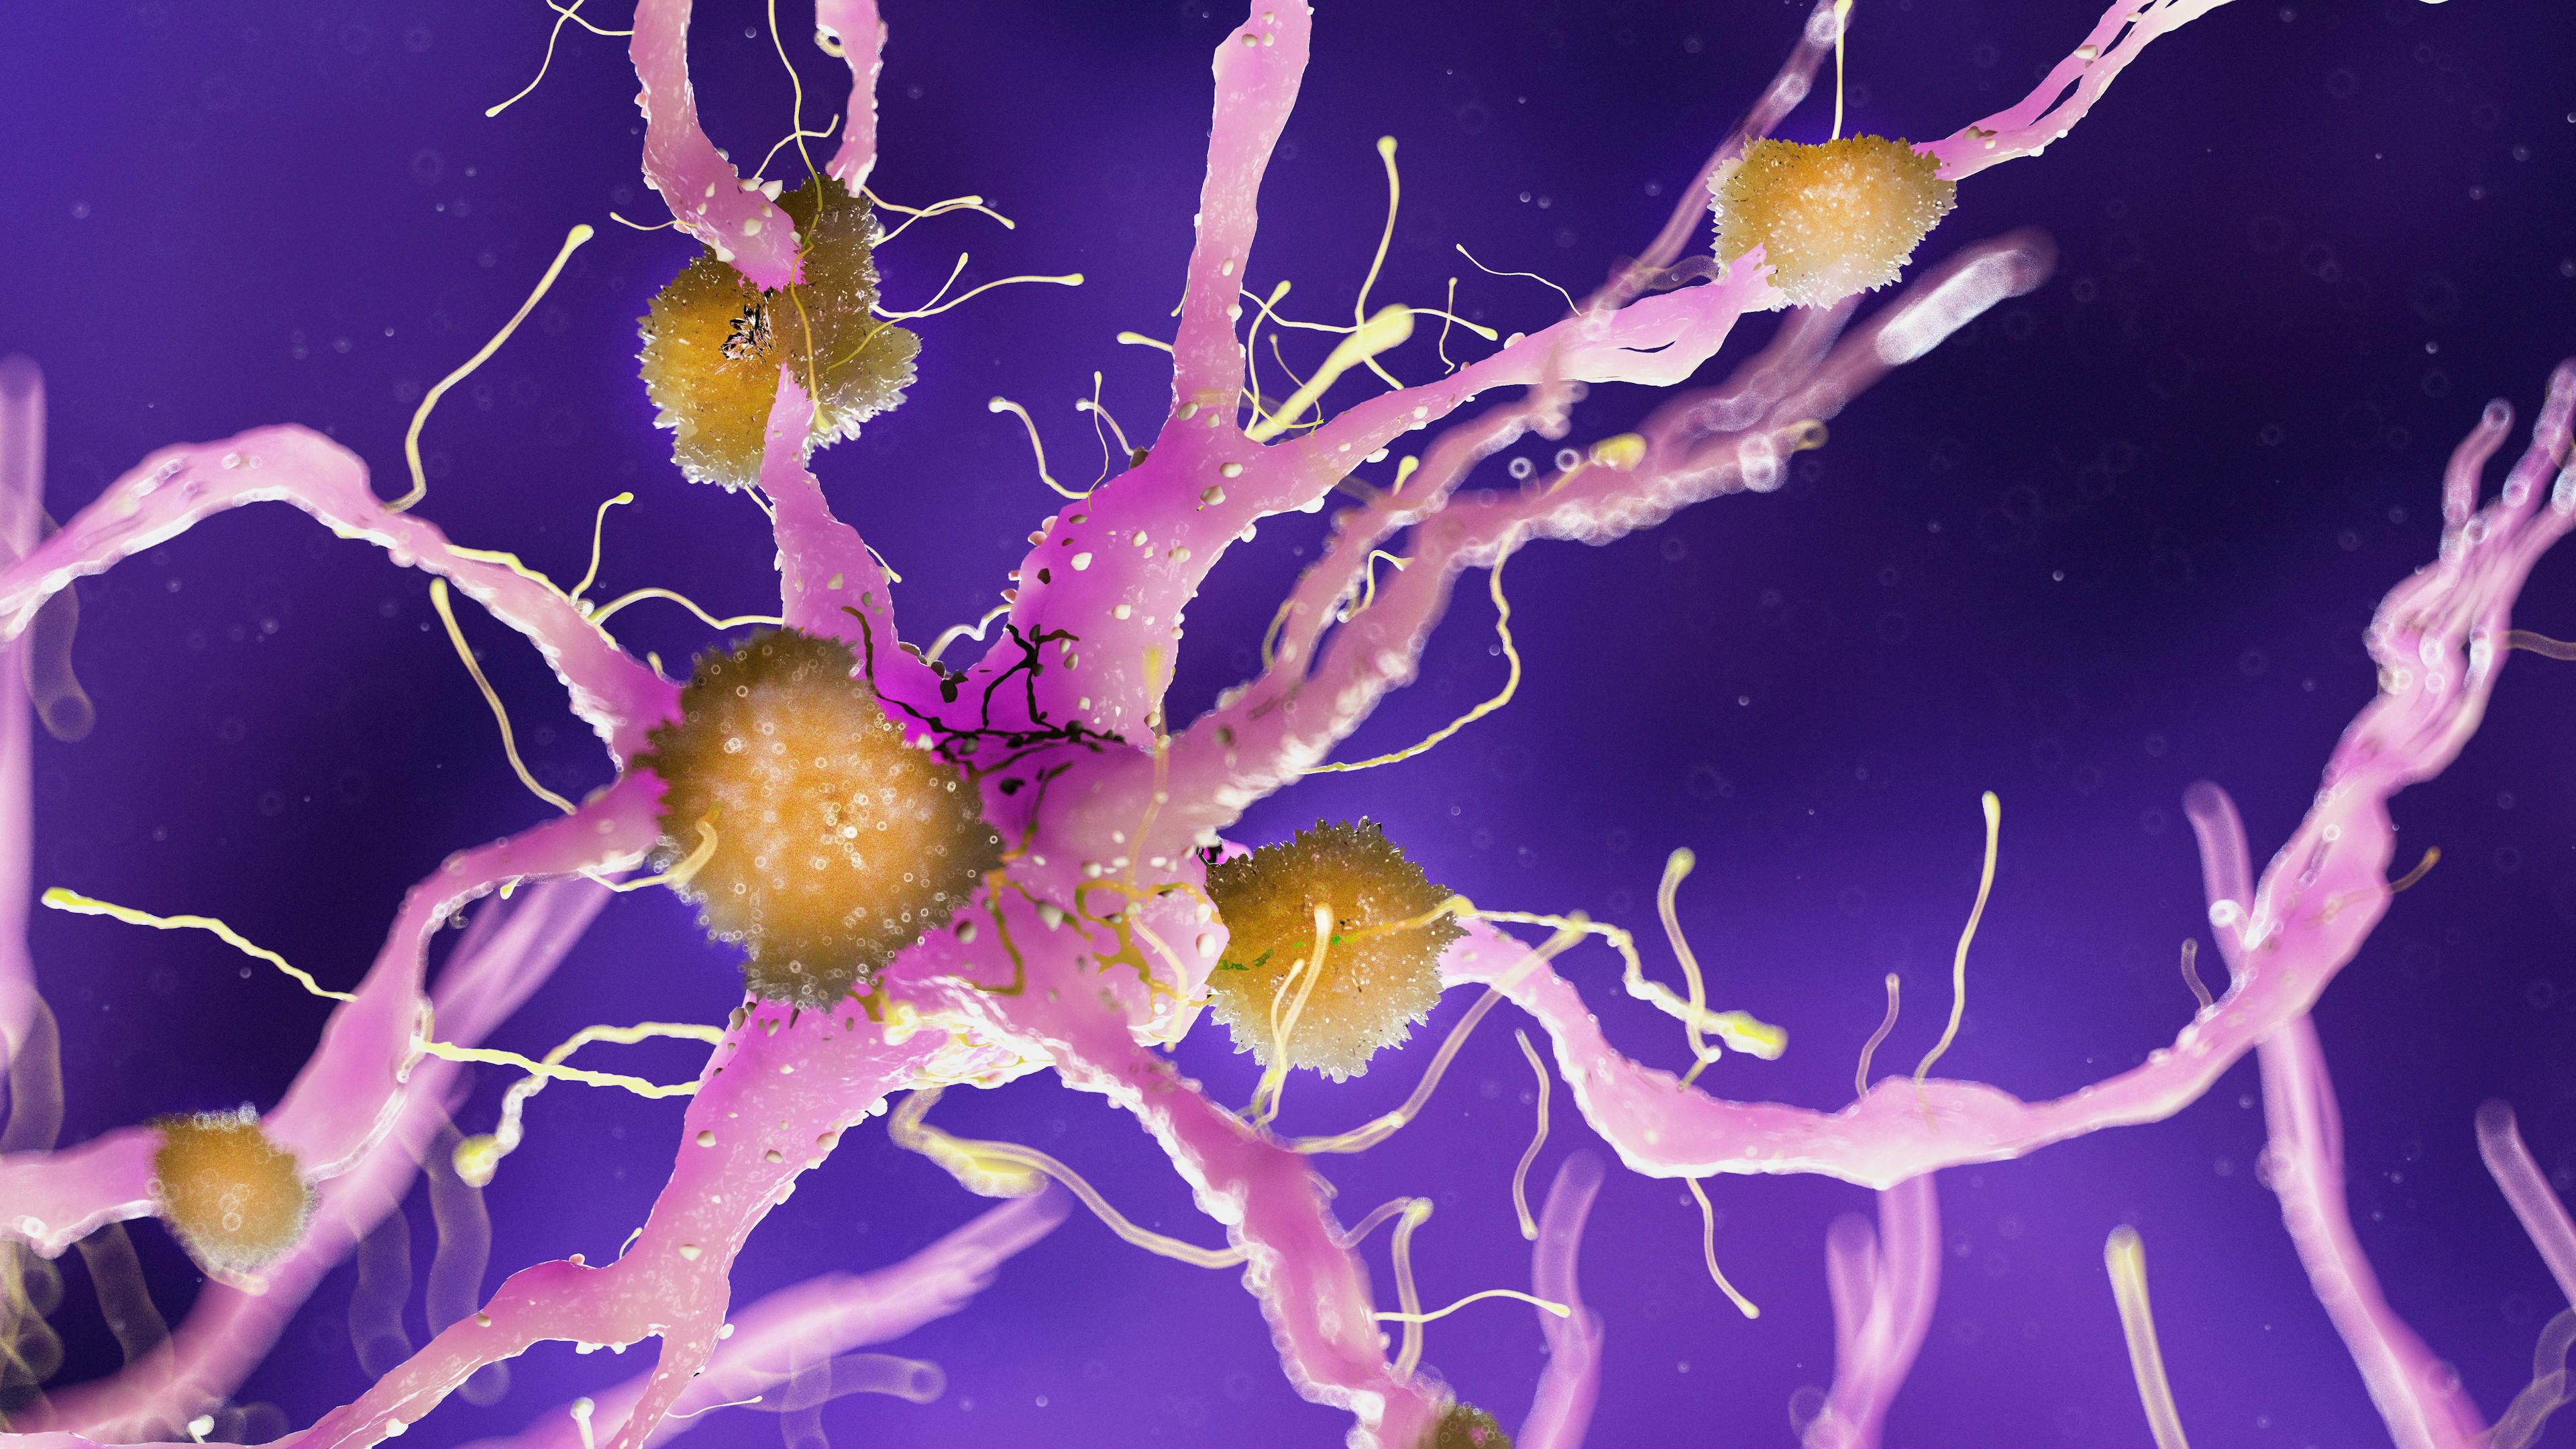 FDA Decision on Donanemab for Alzheimer’s Expected by End of Year